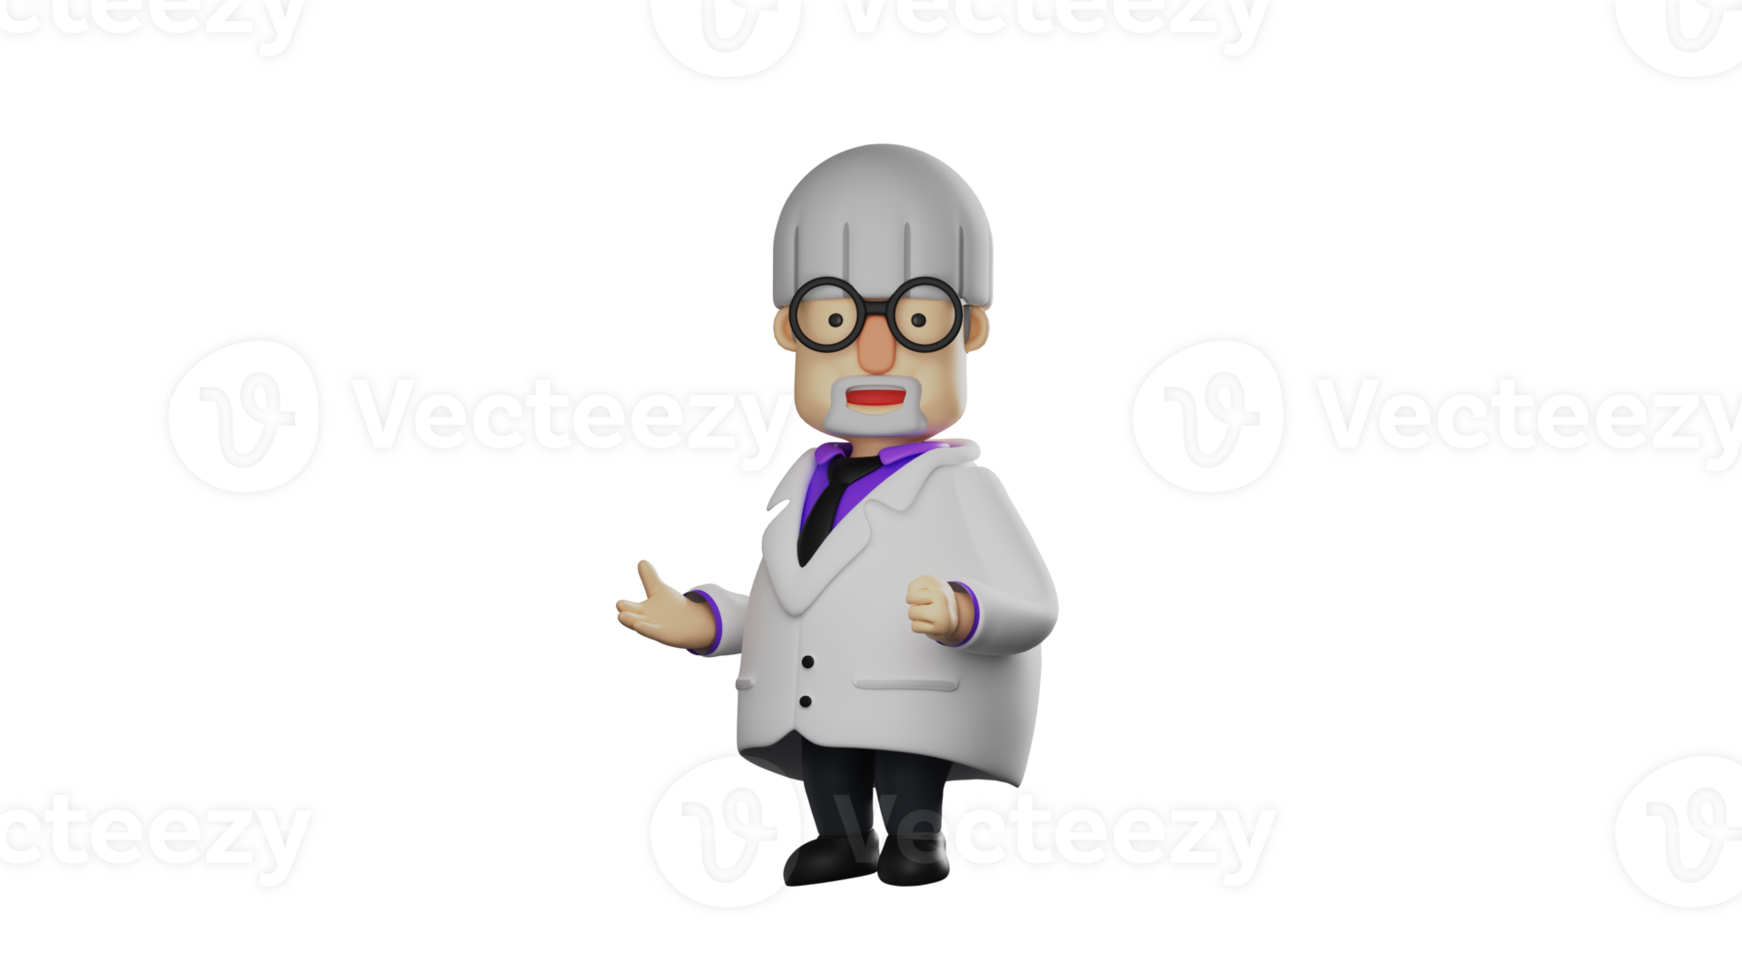 3D illustration. Smart Professor 3D cartoon character. Professor is explaining something. The Professor stands sideways and shows a pose of moving his arms. 3D cartoon character png